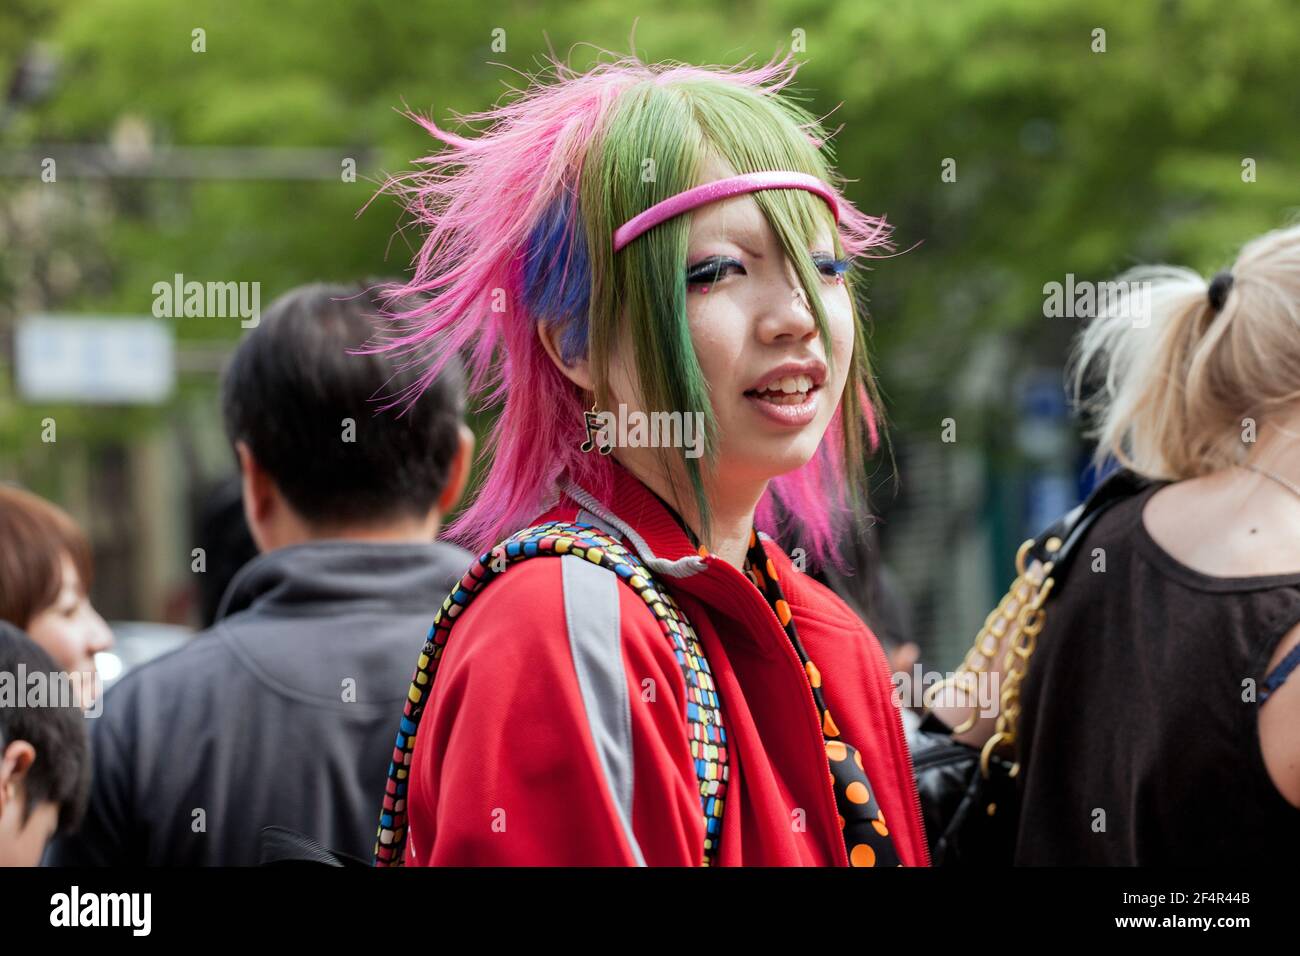 Street Fashion 2008: Japanese female with multicoloured dyed hair and colourful clothes, Harajuku, Tokyo, Japan Stock Photo